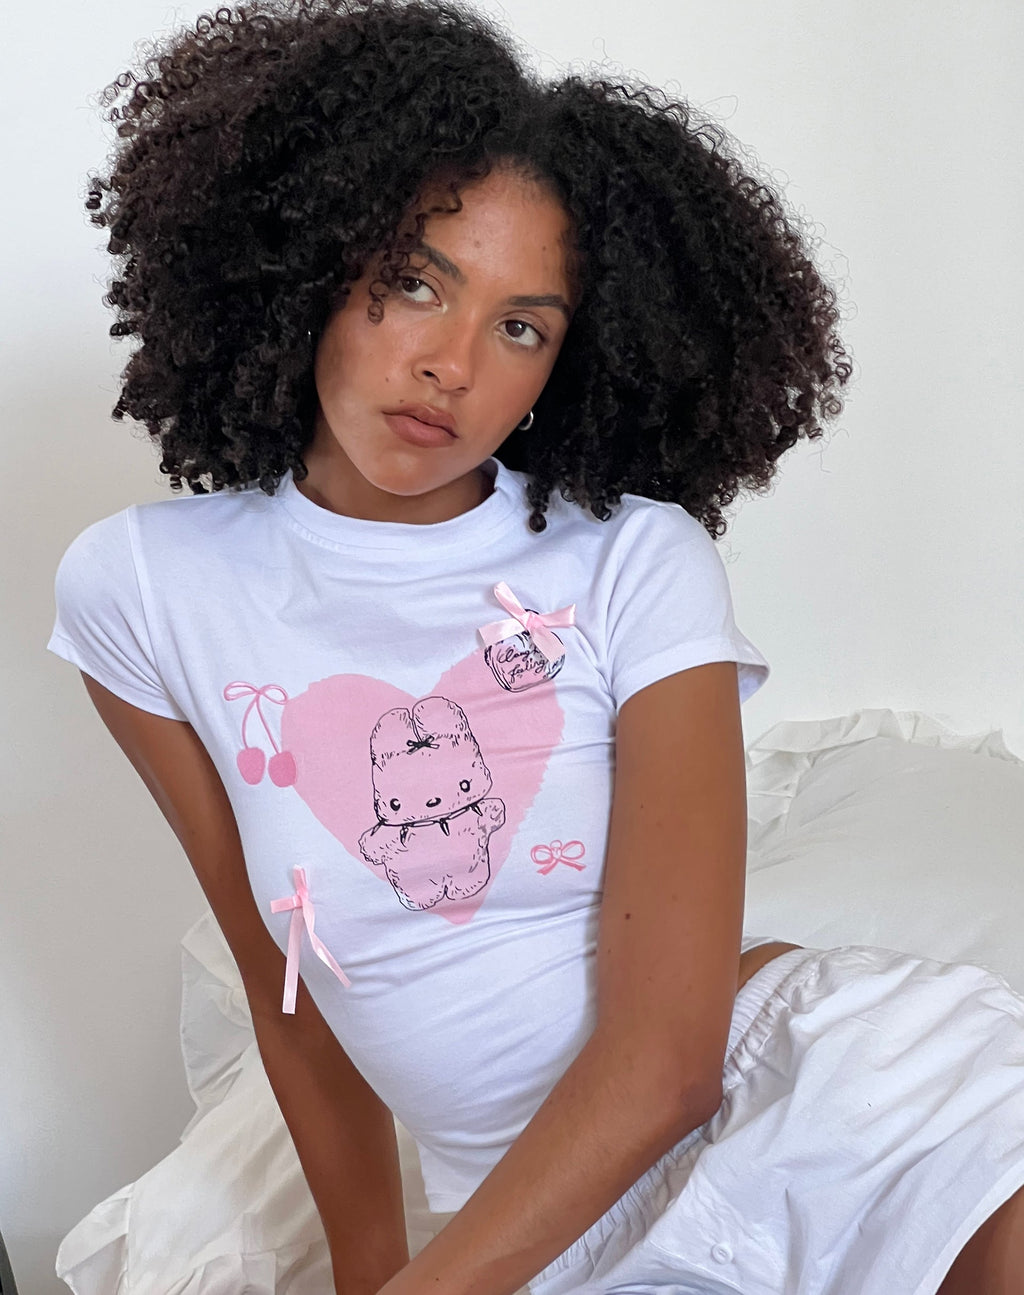 Tiona Cropped Tee in White with Love Bunny Print and Embroidery (T-shirt court en blanc avec imprimé et broderie Love Bunny)